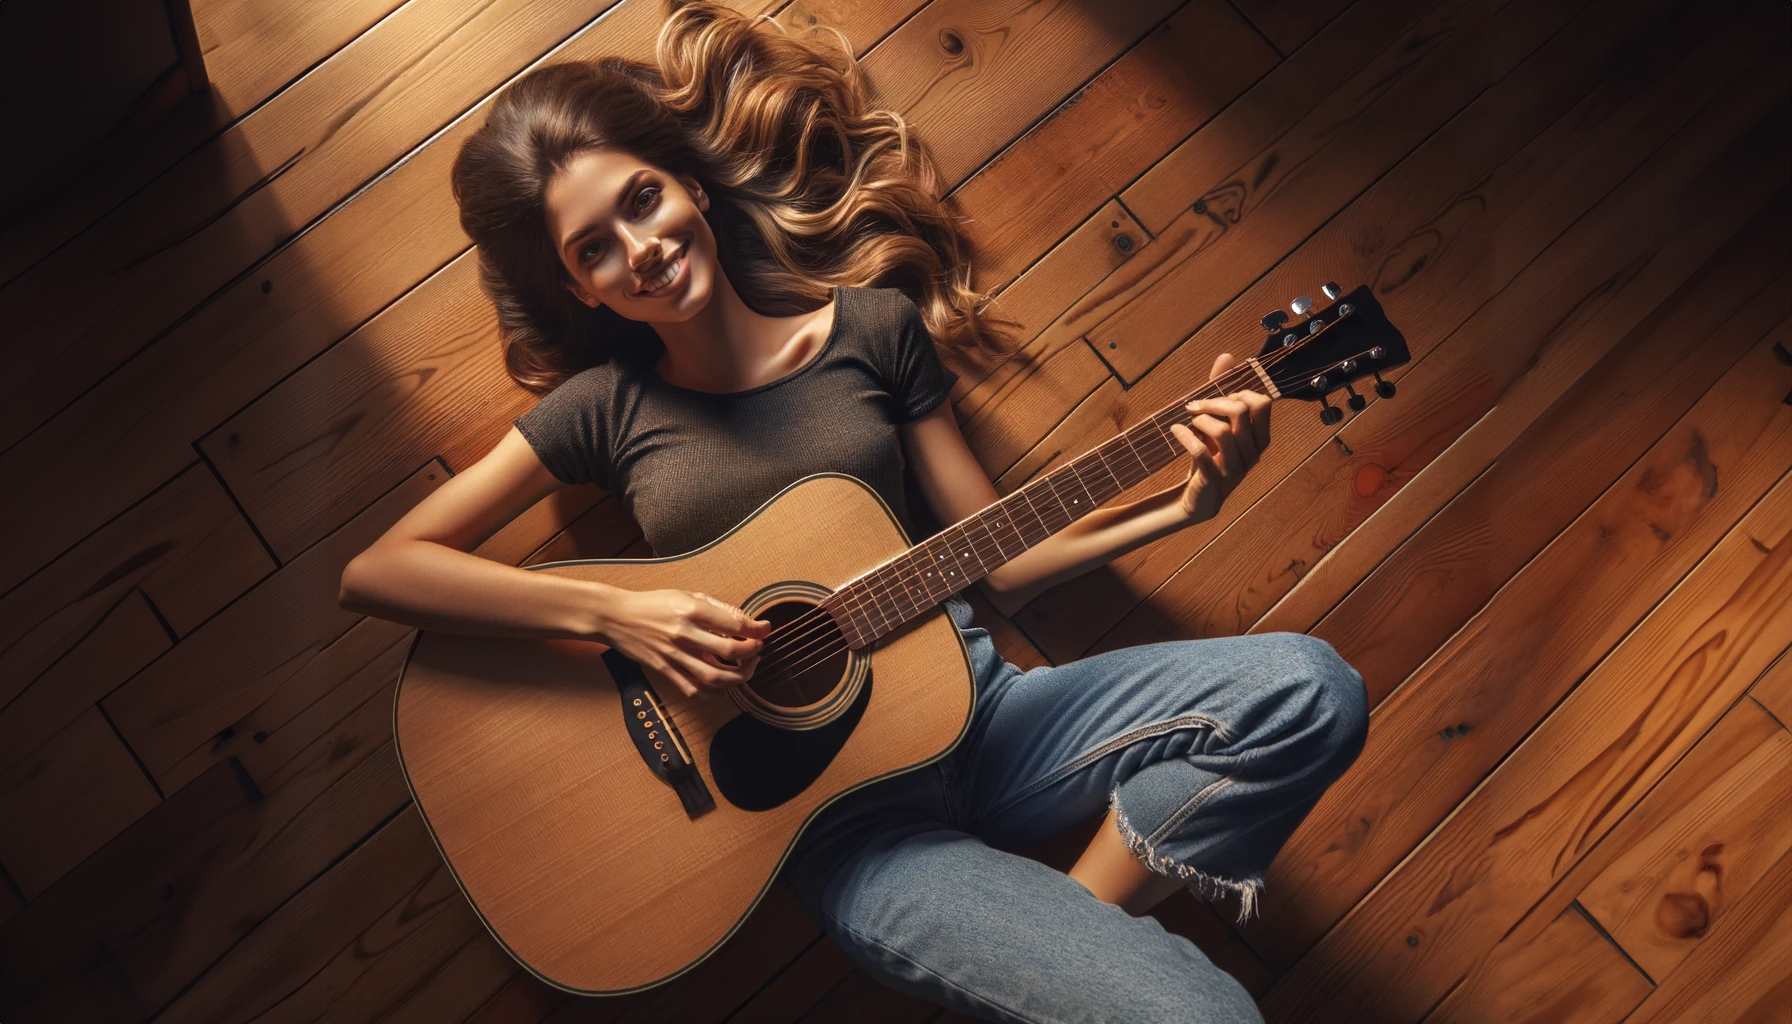 DALL·E 2024-03-22 13.36.17 - Aerial view of a woman lying on a hardwood floor with an acoustic guitar. She is smiling and strumming the guitar, captured from directly above. The w.png